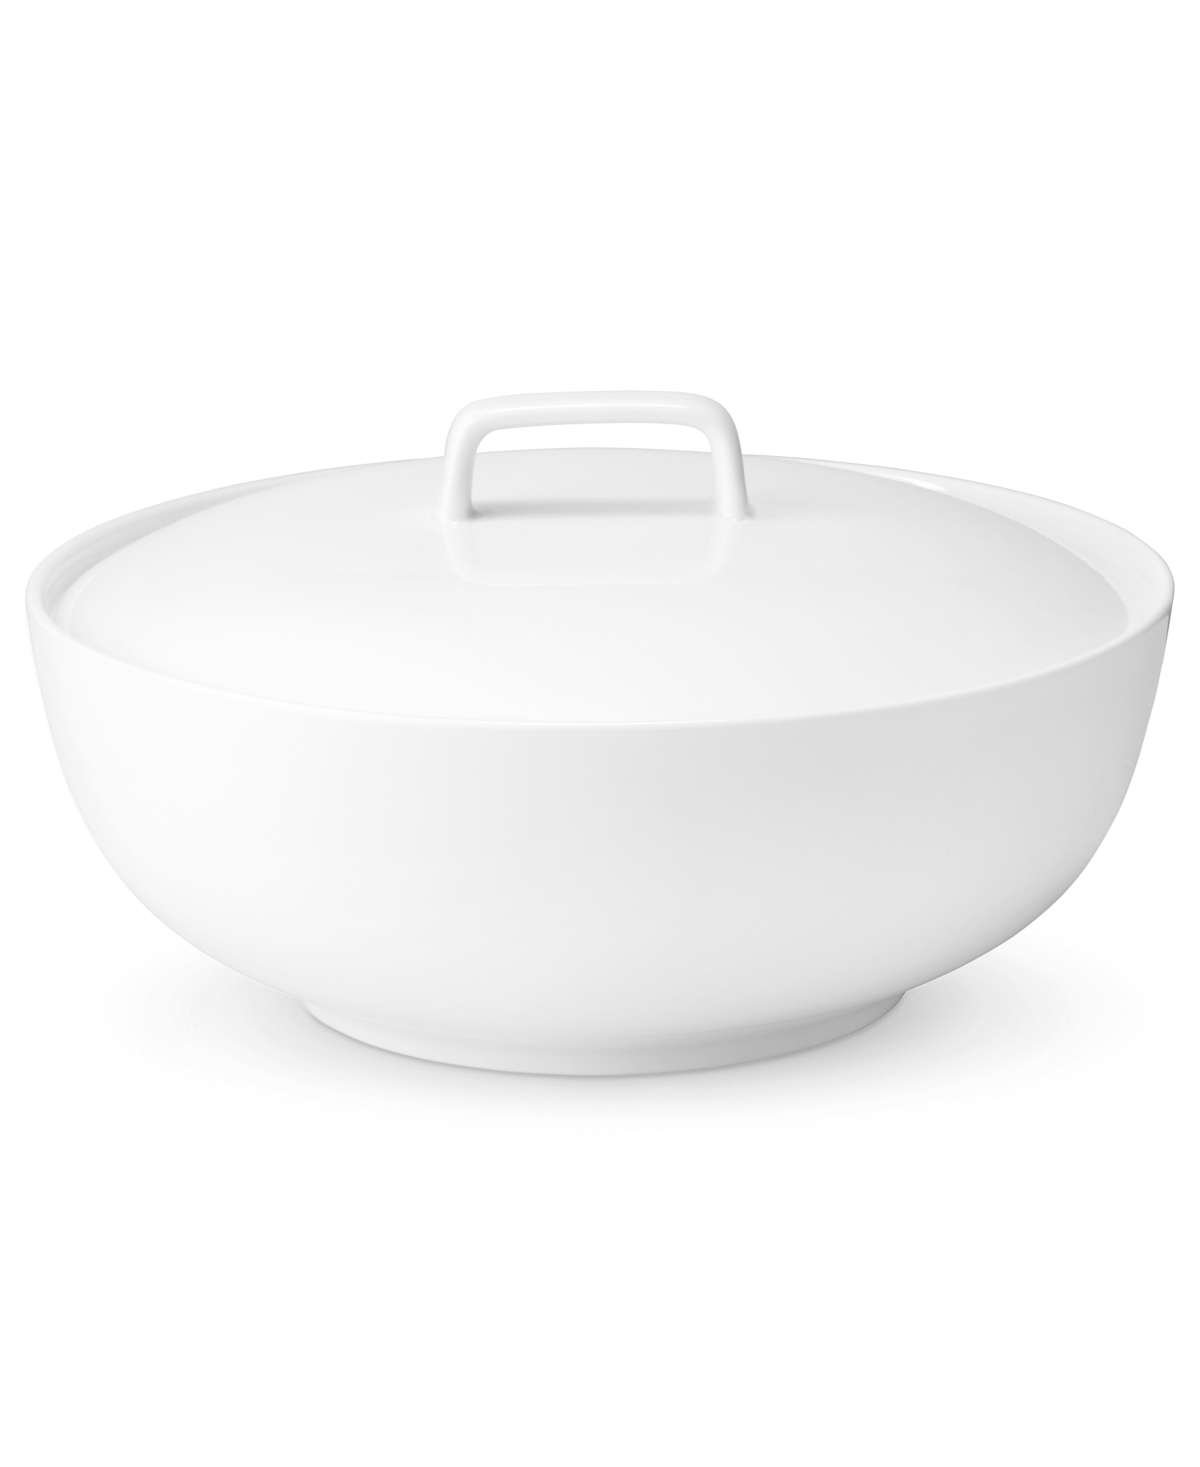 The Cellar Whiteware Covered Vegetable Bowl, Created for Macy's